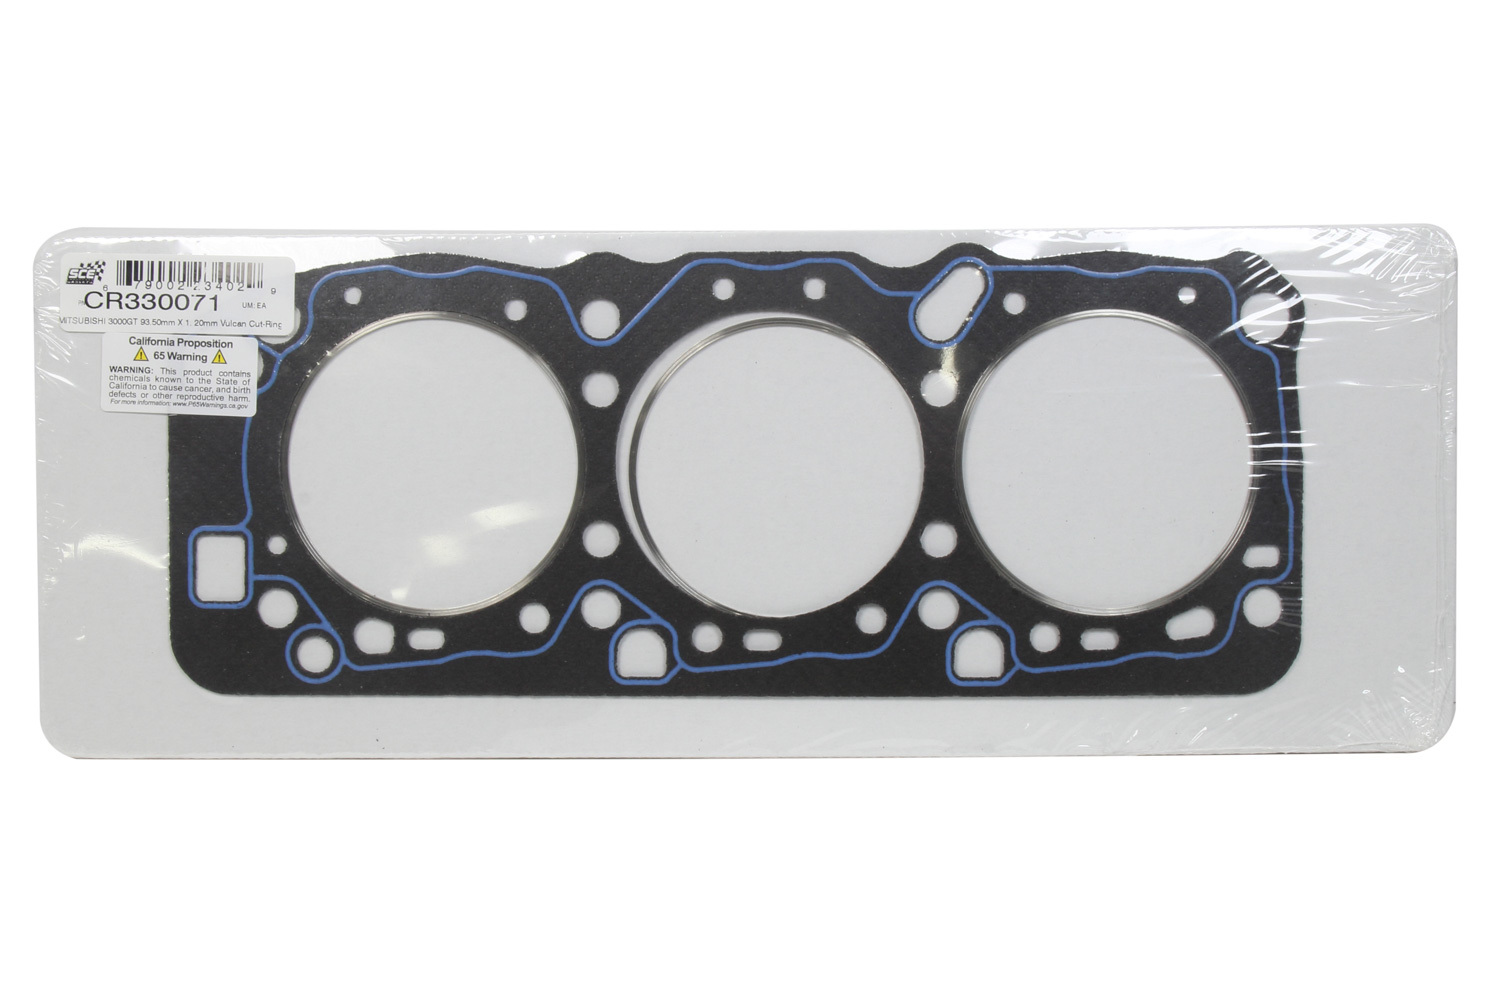 SCE Gaskets CR330071 - Cylinder Head Gasket, Vulcan Cut Ring, 93.50 mm Bore, 1.20 mm Compression Thickness, Steel Core Laminate, Mitsubishi V6, Each